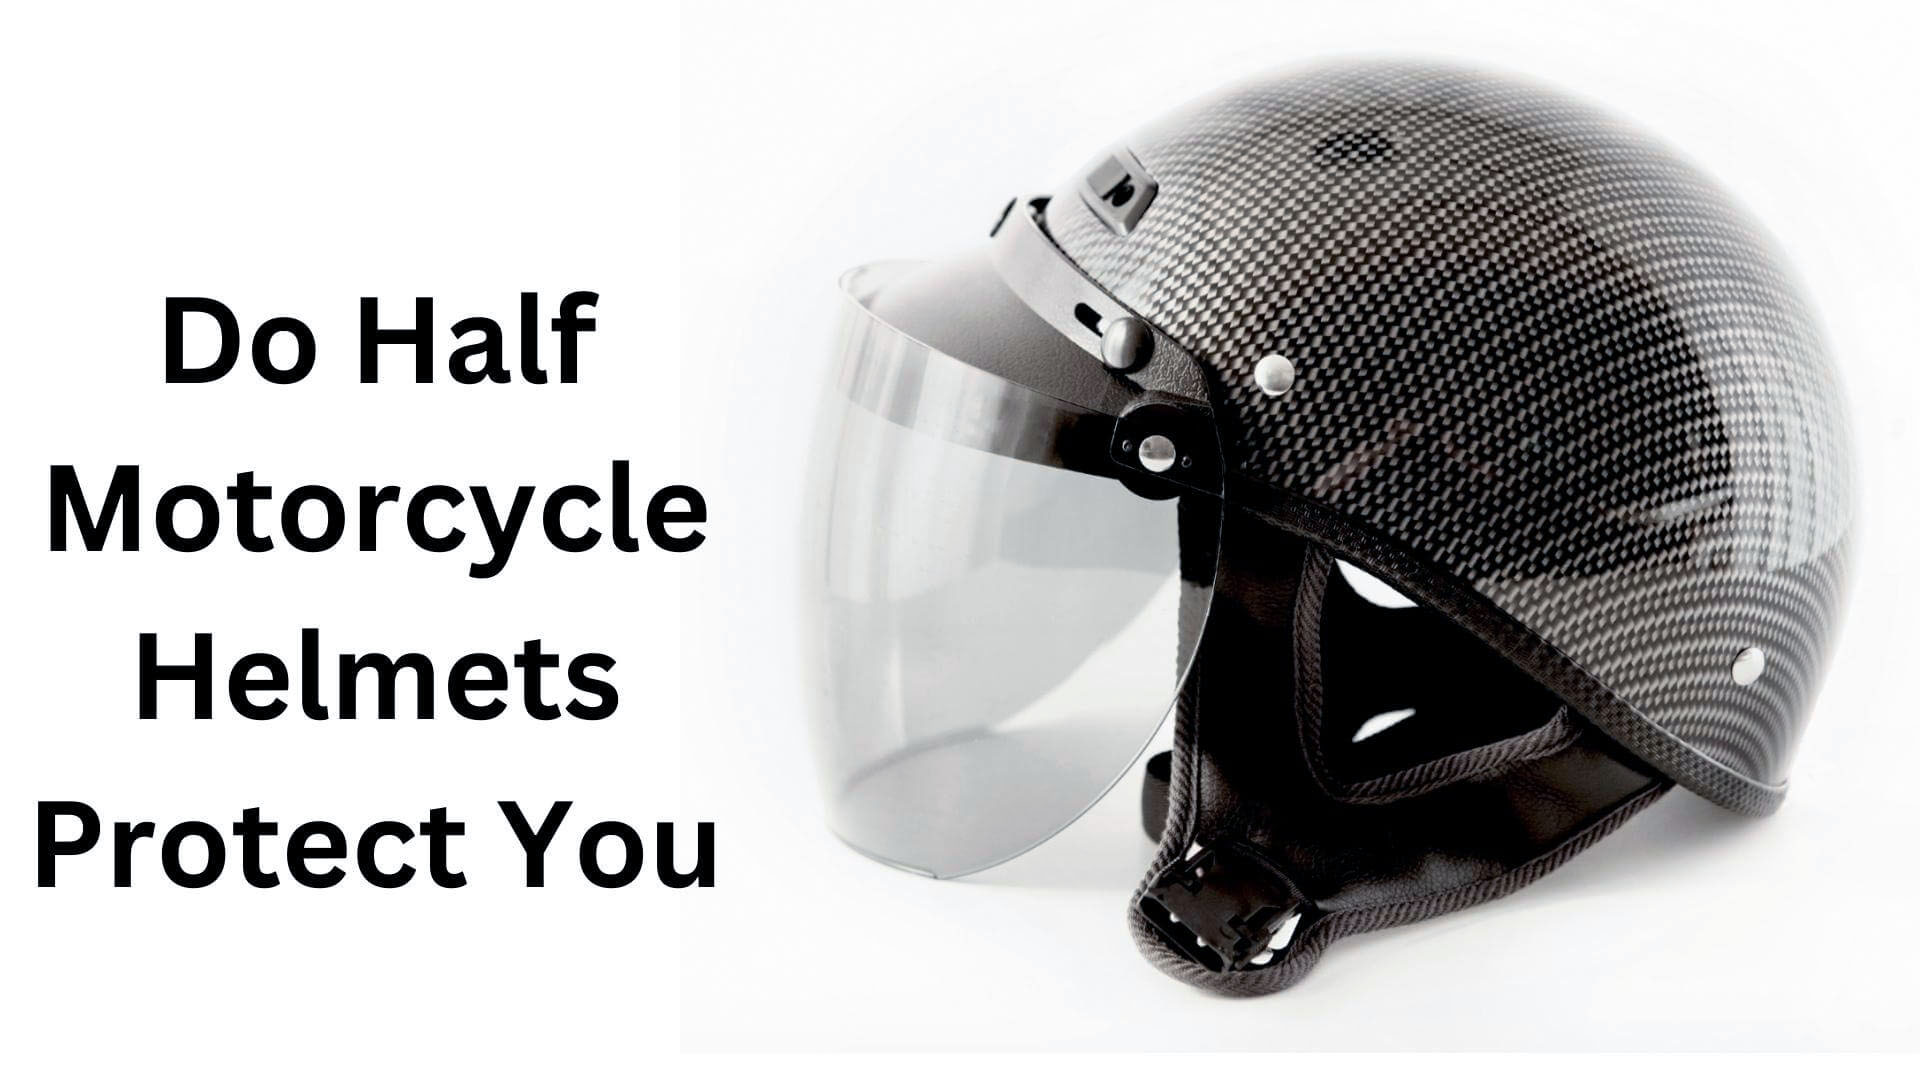 Do Half-Motorcycle Helmets Protect You?